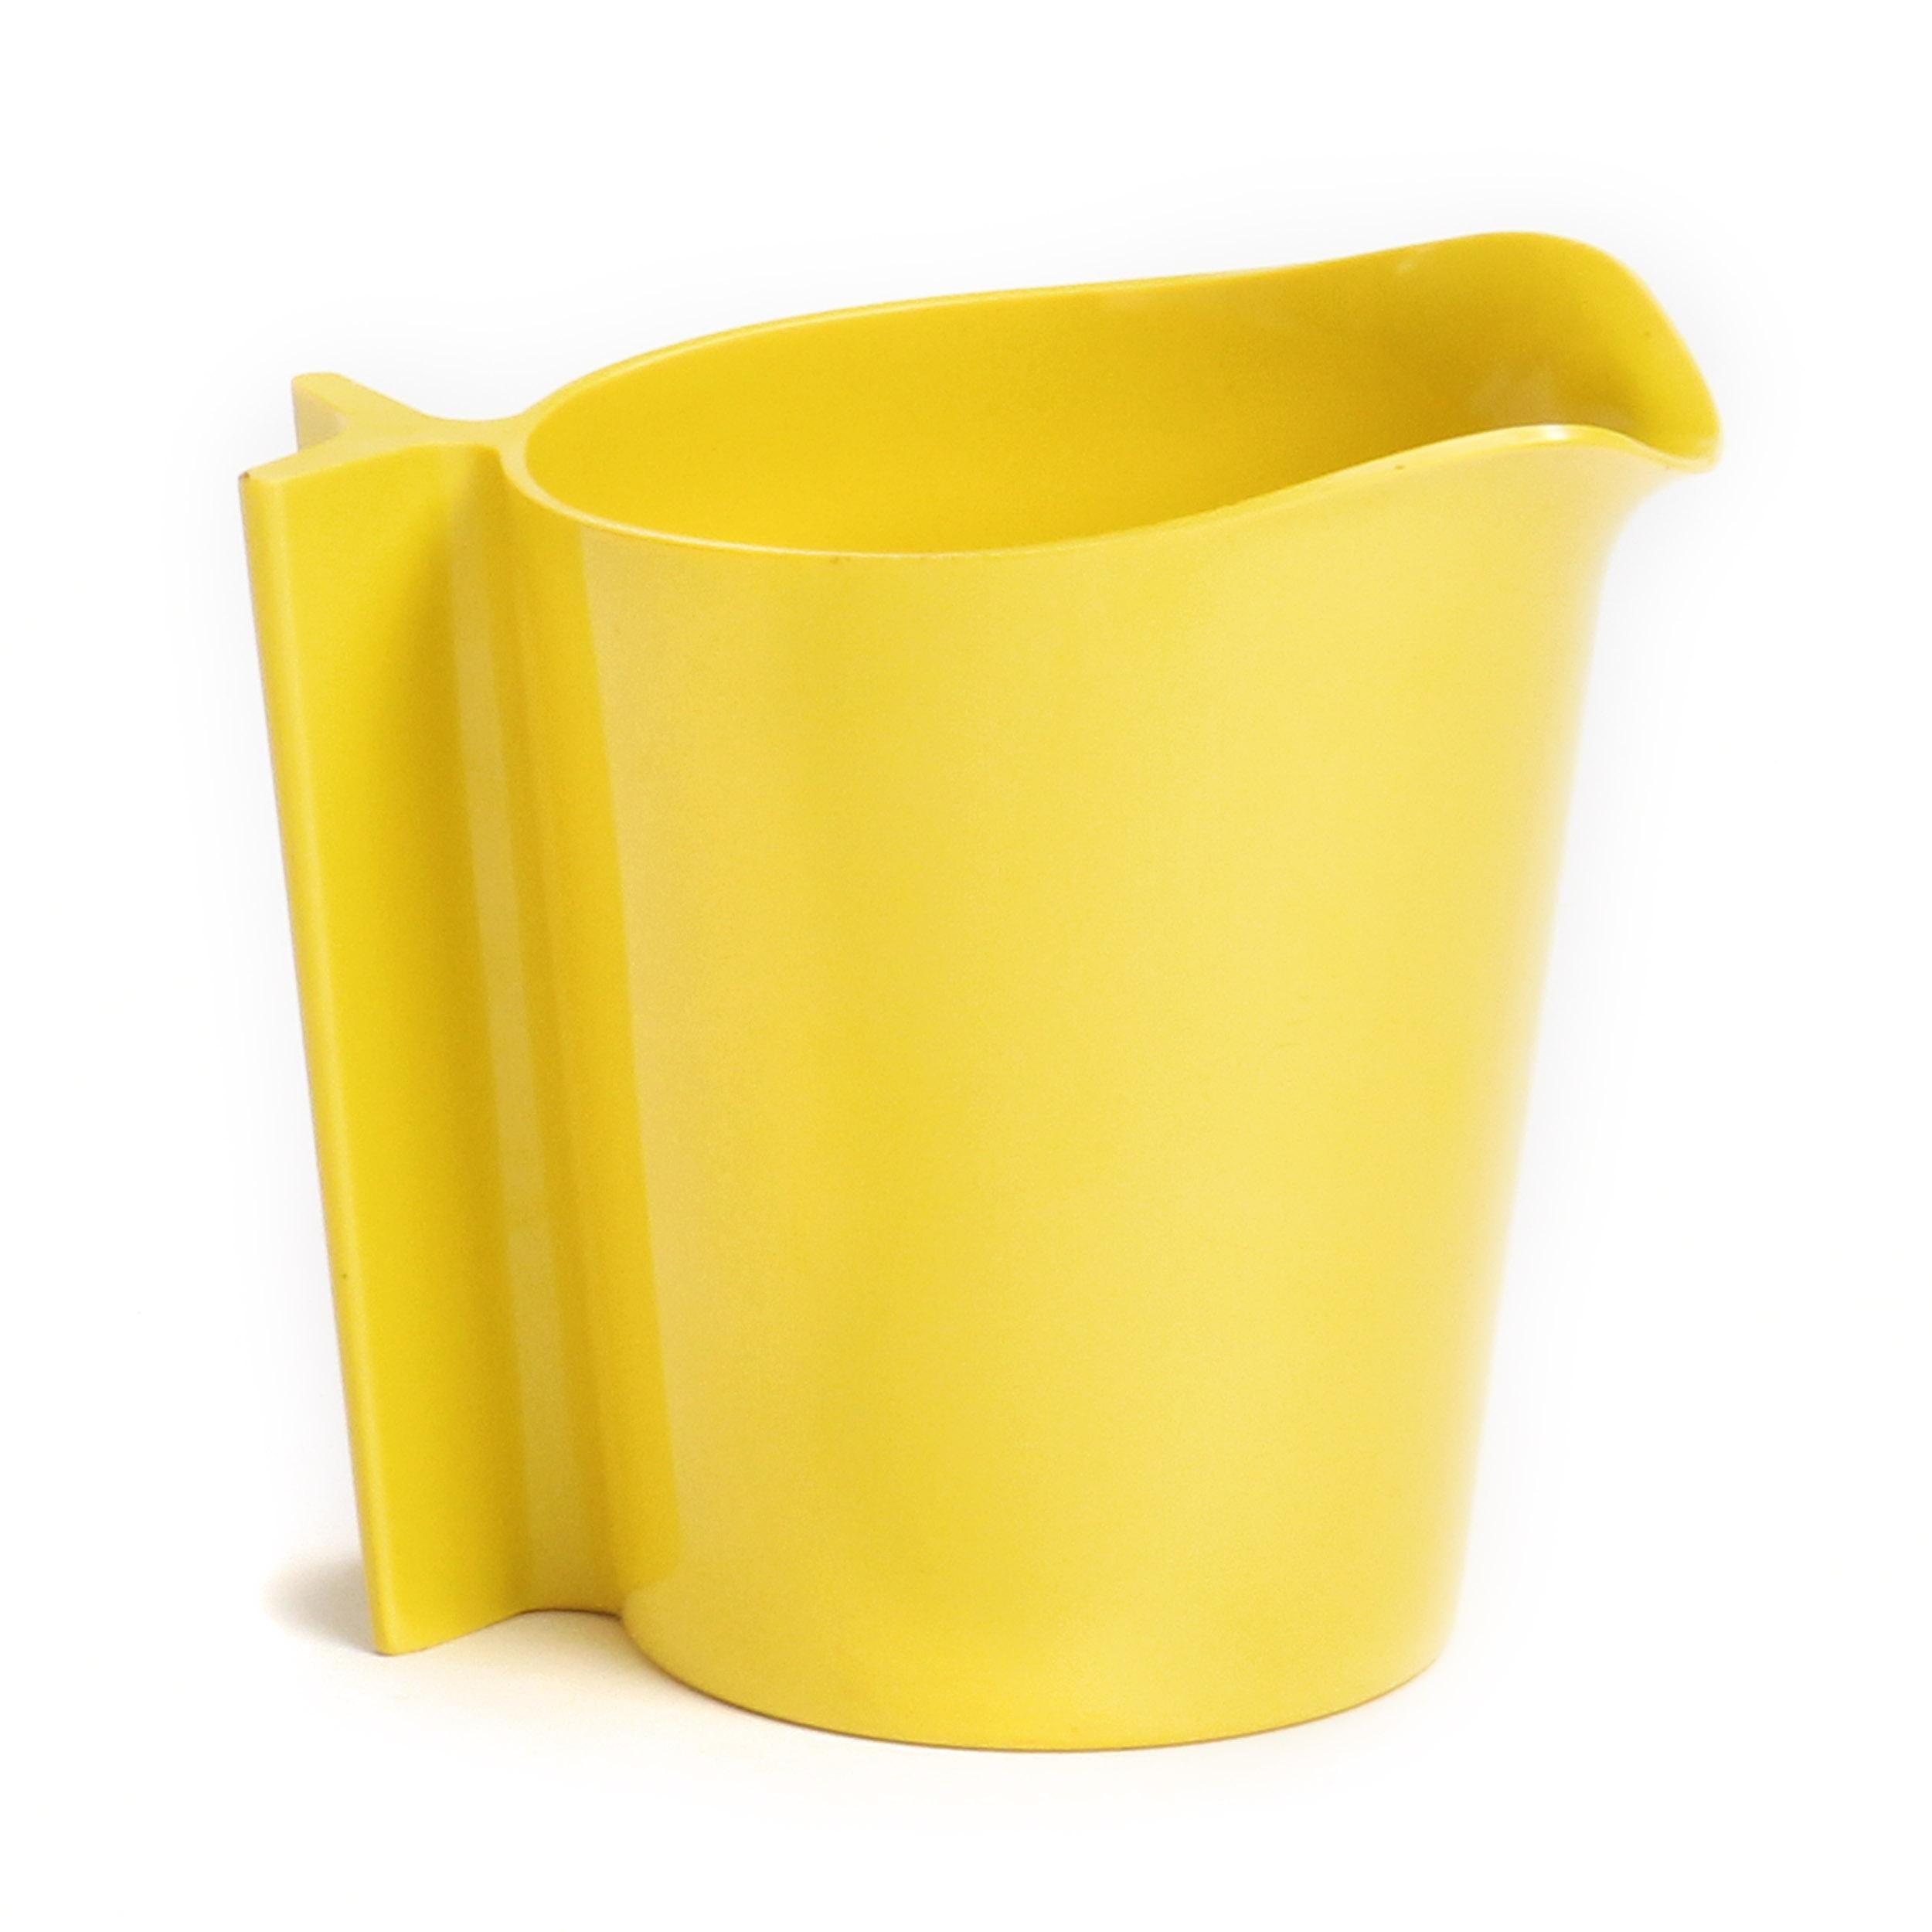 An expressive, uncommon and sculptural pitcher finely executed in vibrant yellow plastic.